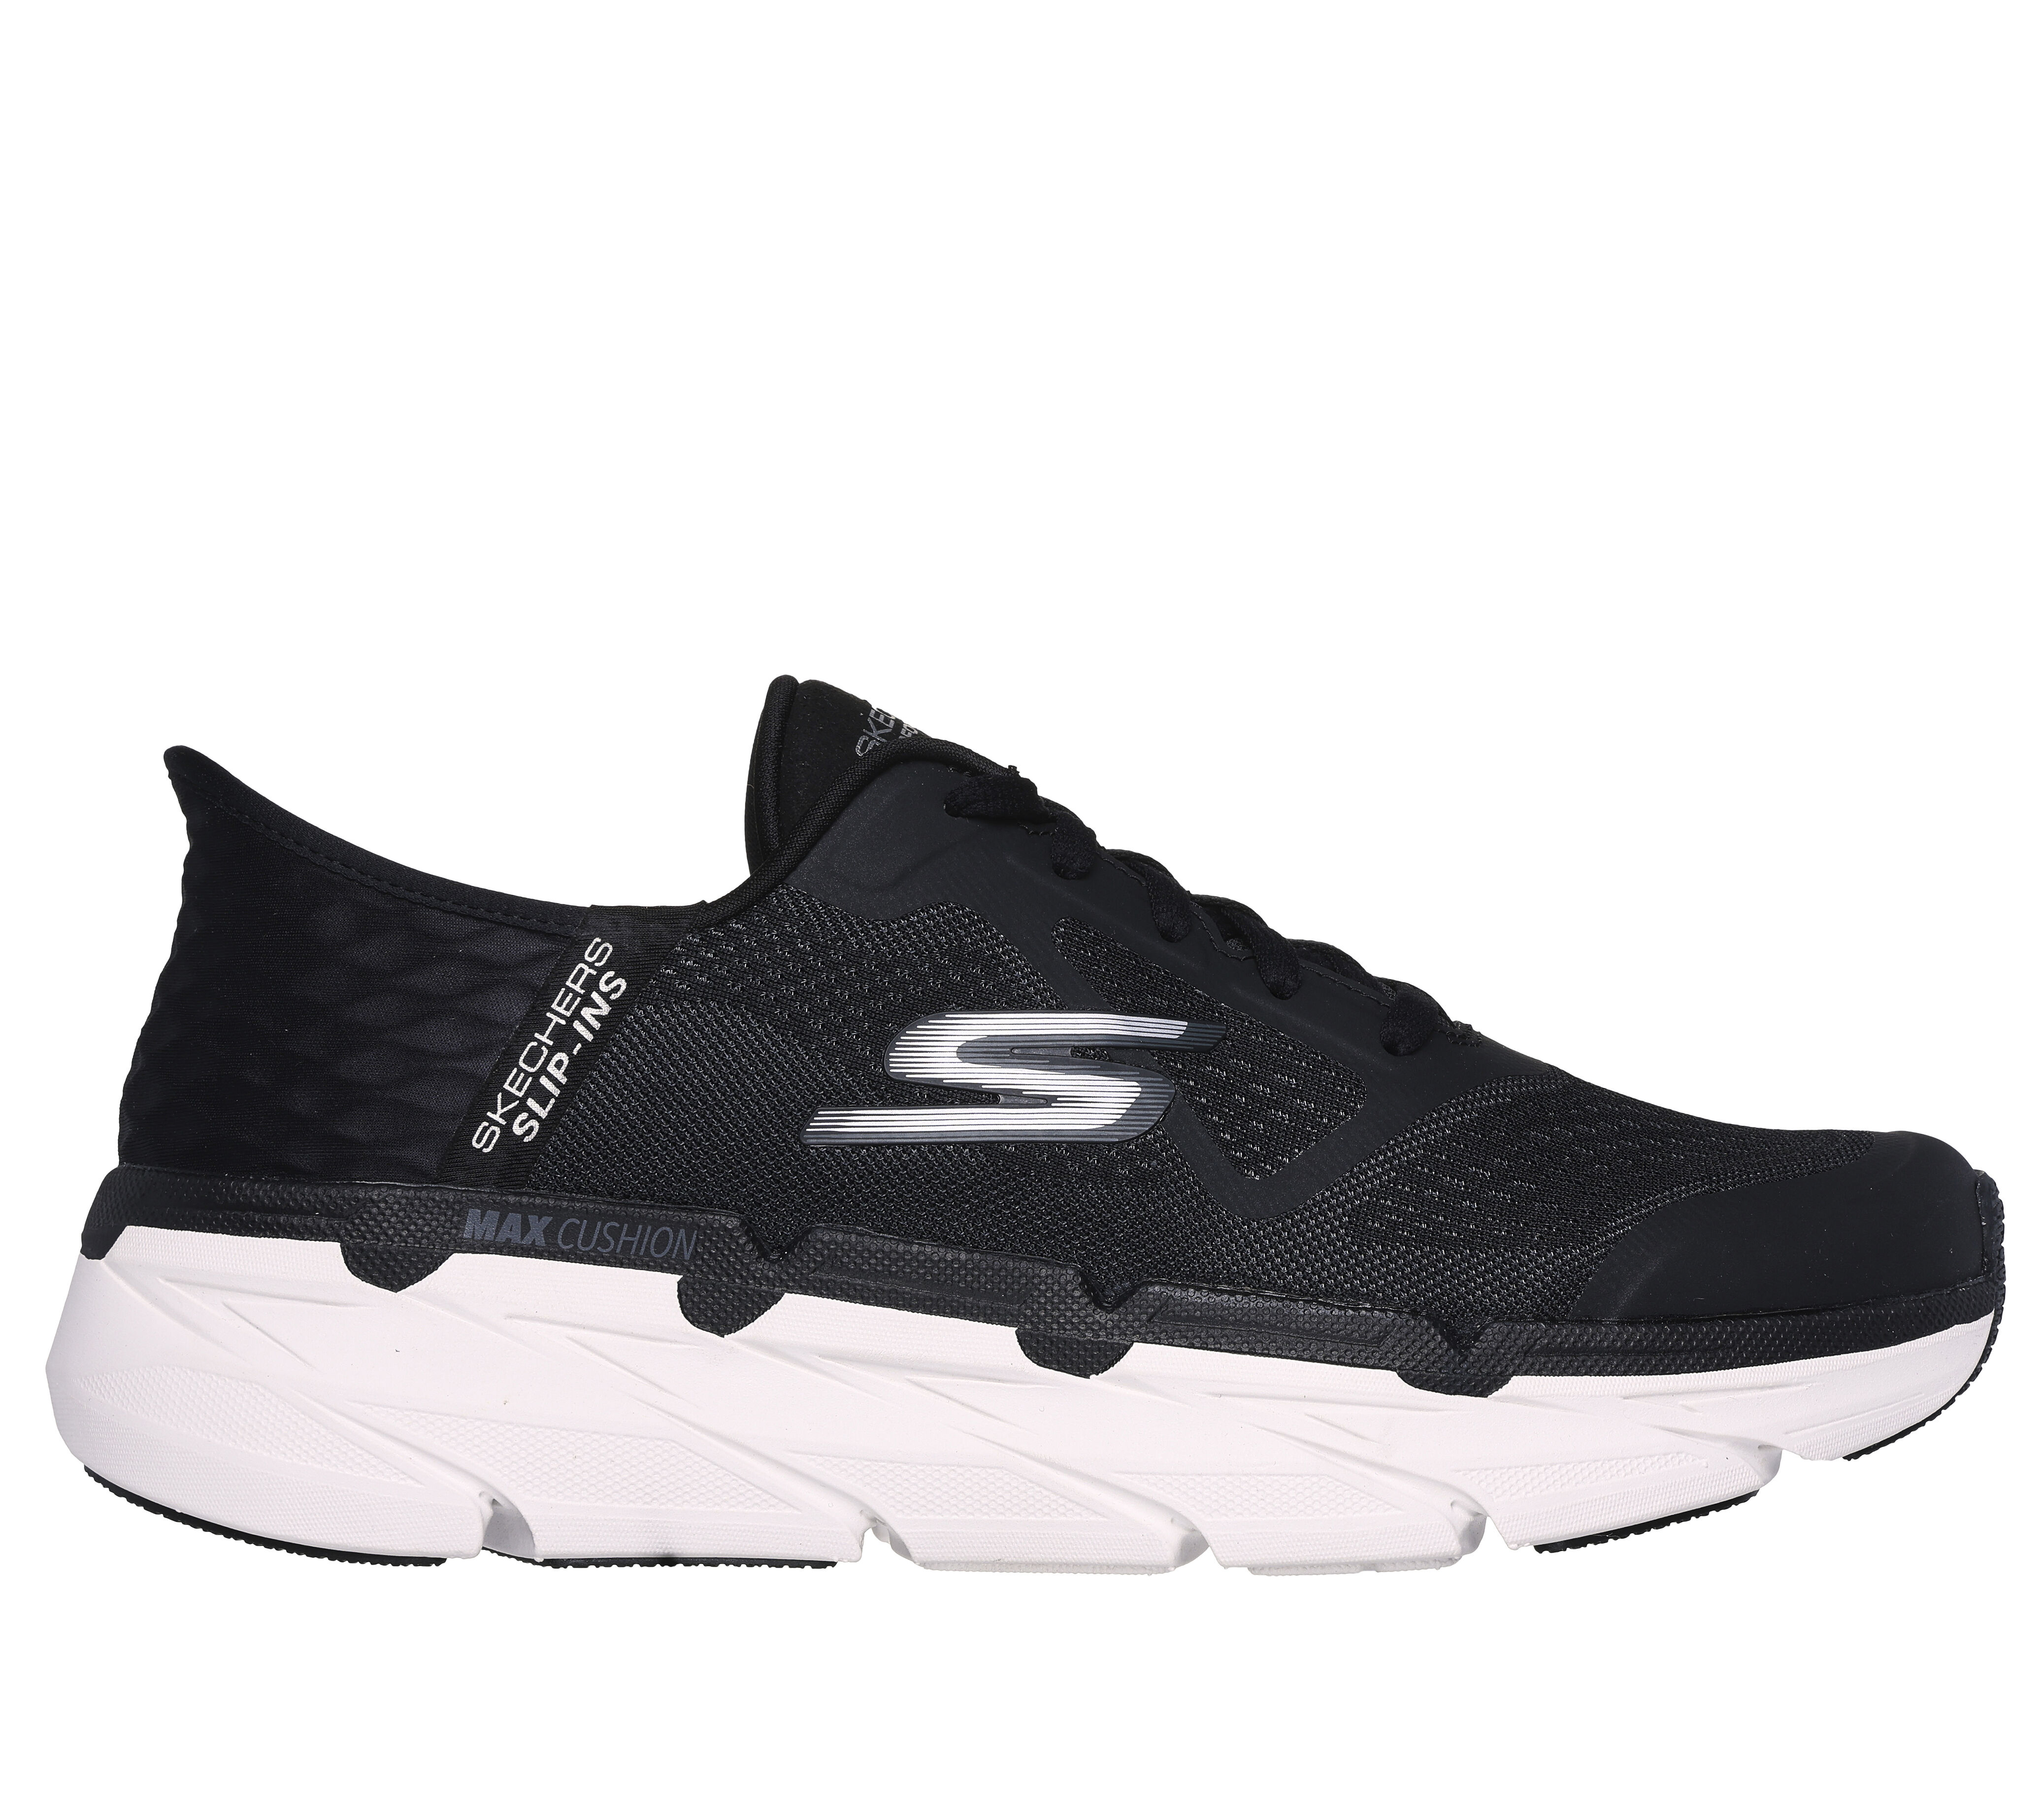 Men's Max Cushioning Collection | SKECHERS